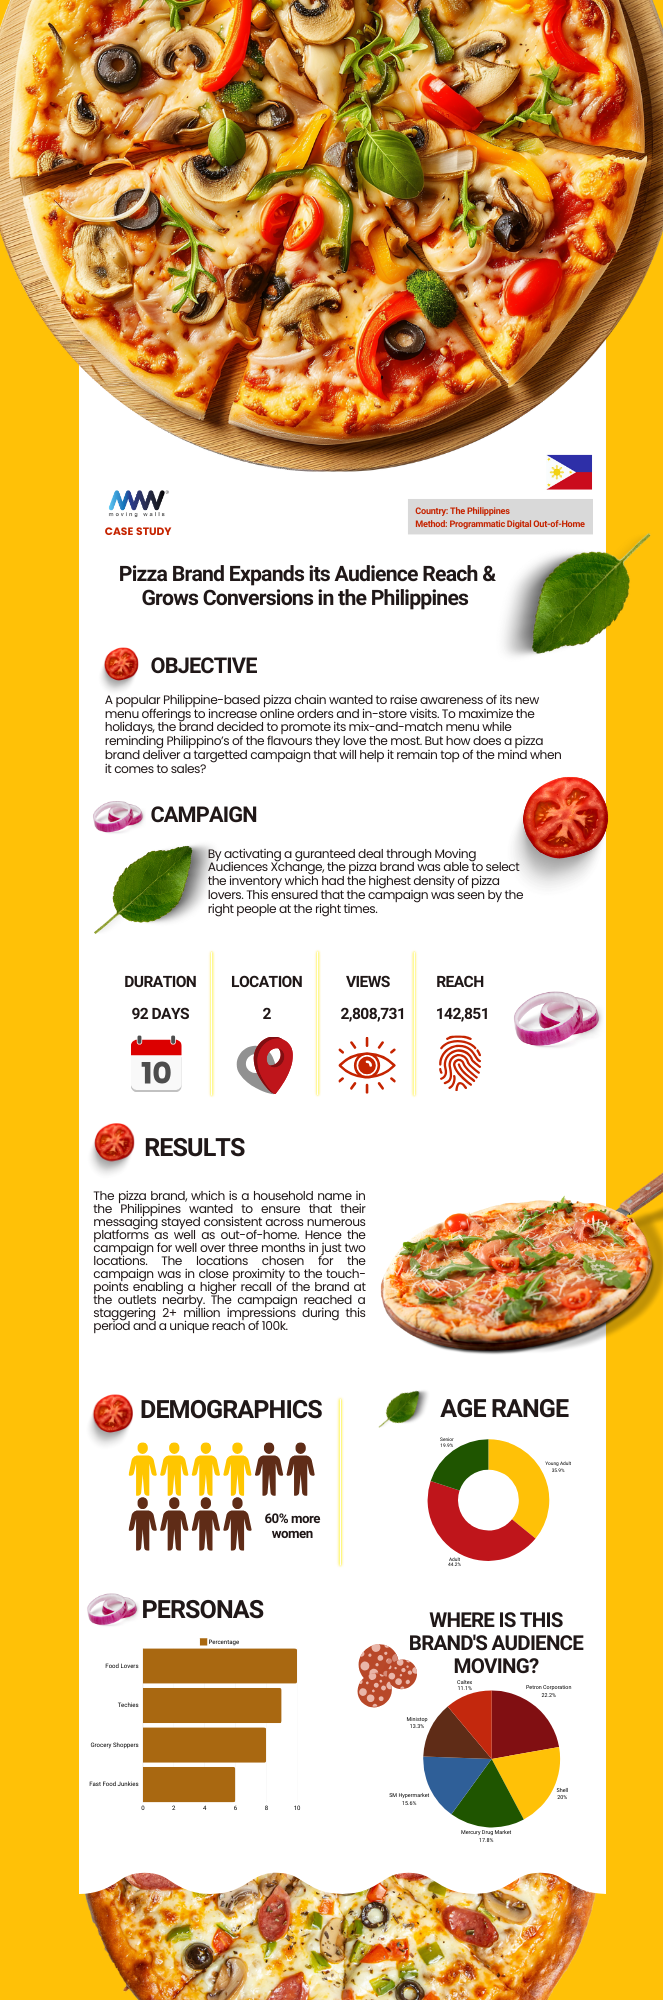 Moving Walls Case Study Pizza brand Philippines